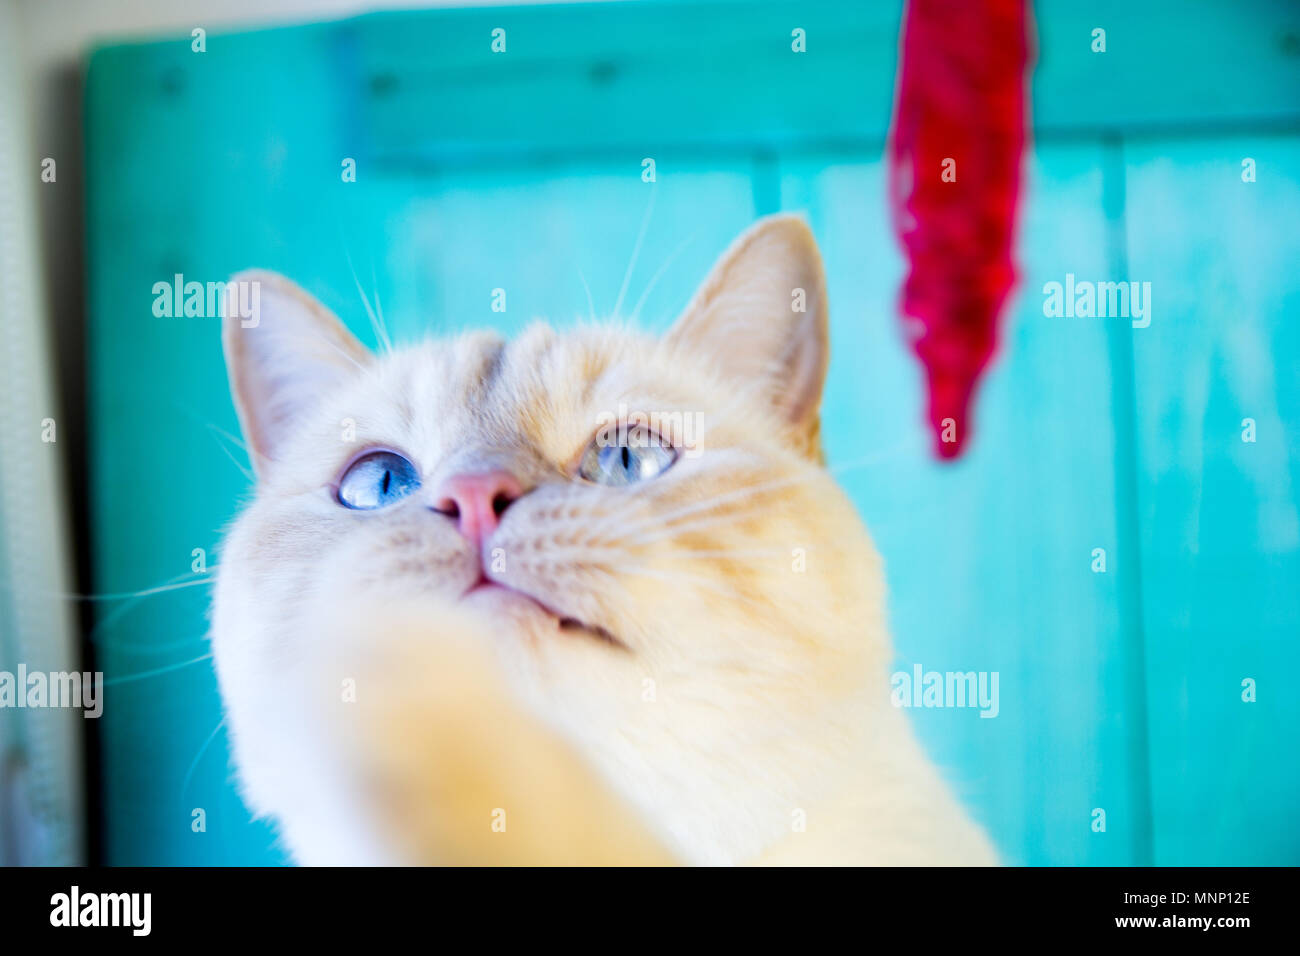 curious white cat with very vivid facial expressions of sadness, fun, funny, sad, with blue eyes playing with a red heart Stock Photo